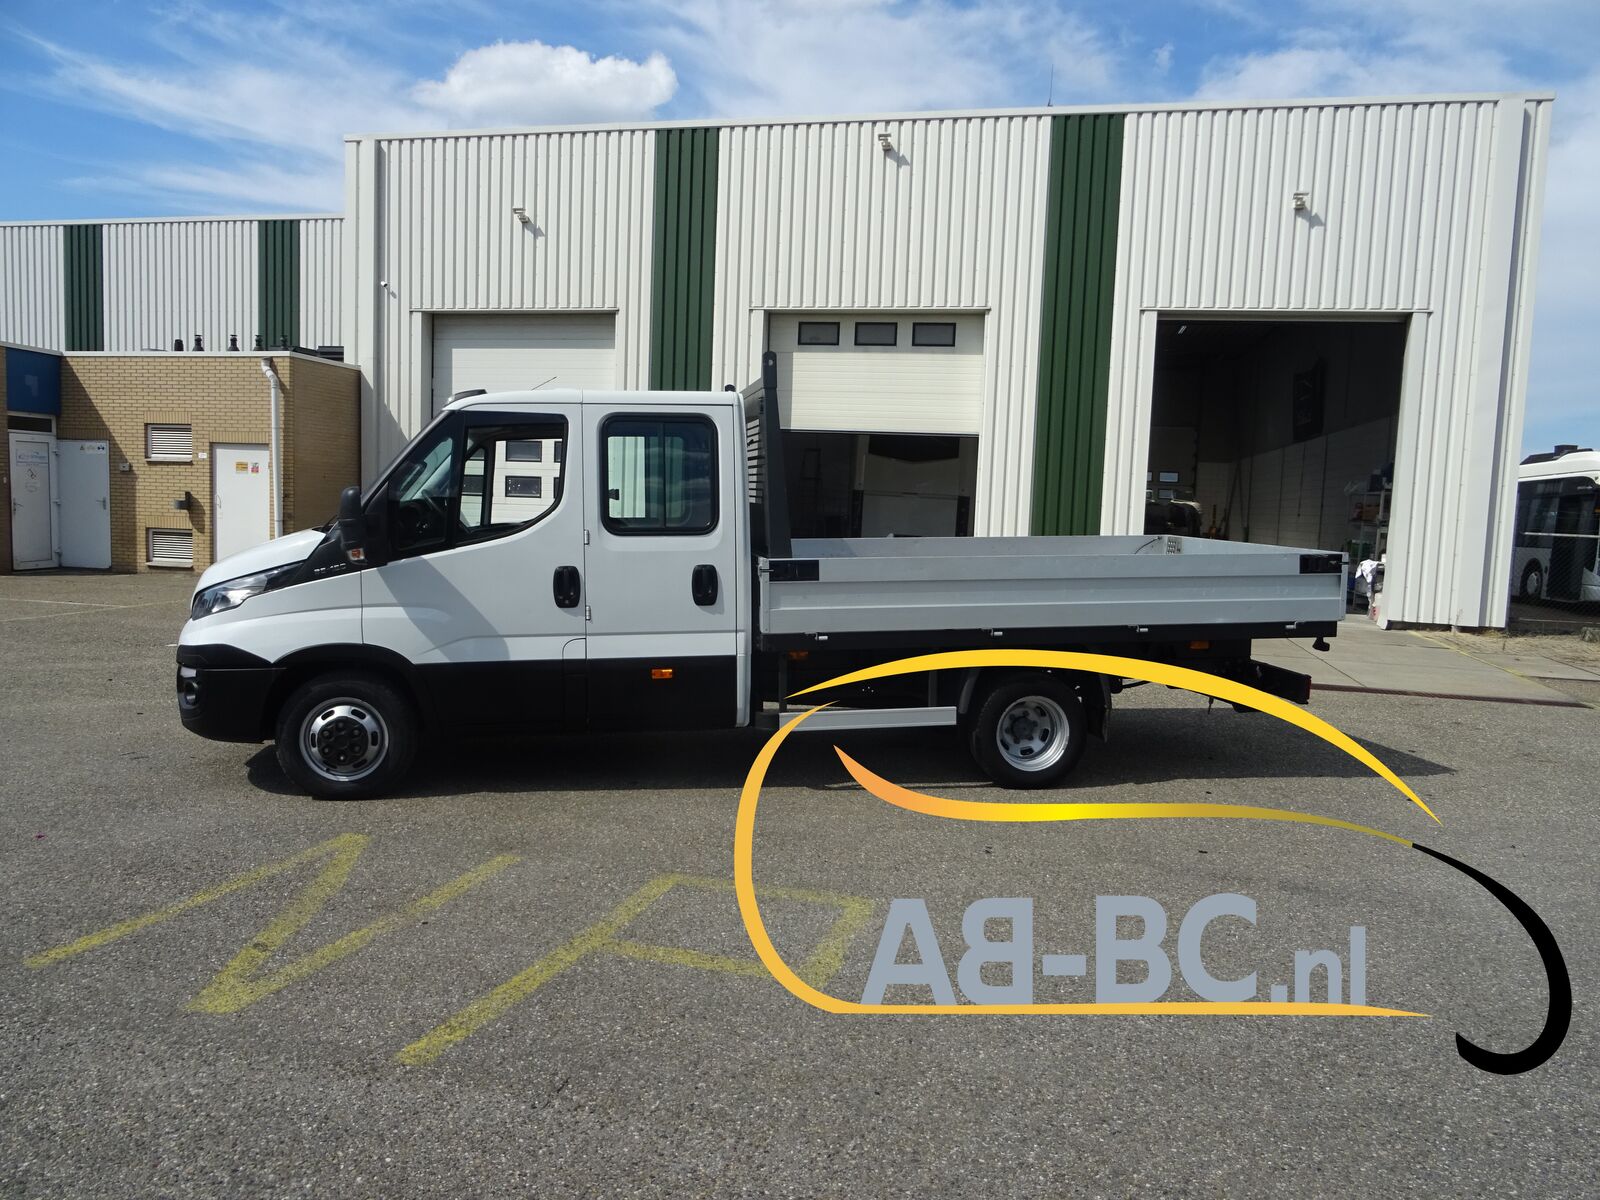 commercial-vehicle-flatbed-truck-3-5t-IVECO-Daily-35c12-dubbelcabine-pick-up---1661350116795083224_orig_92f7129f9596ddc573886af34a7852a7--22082416584990642700